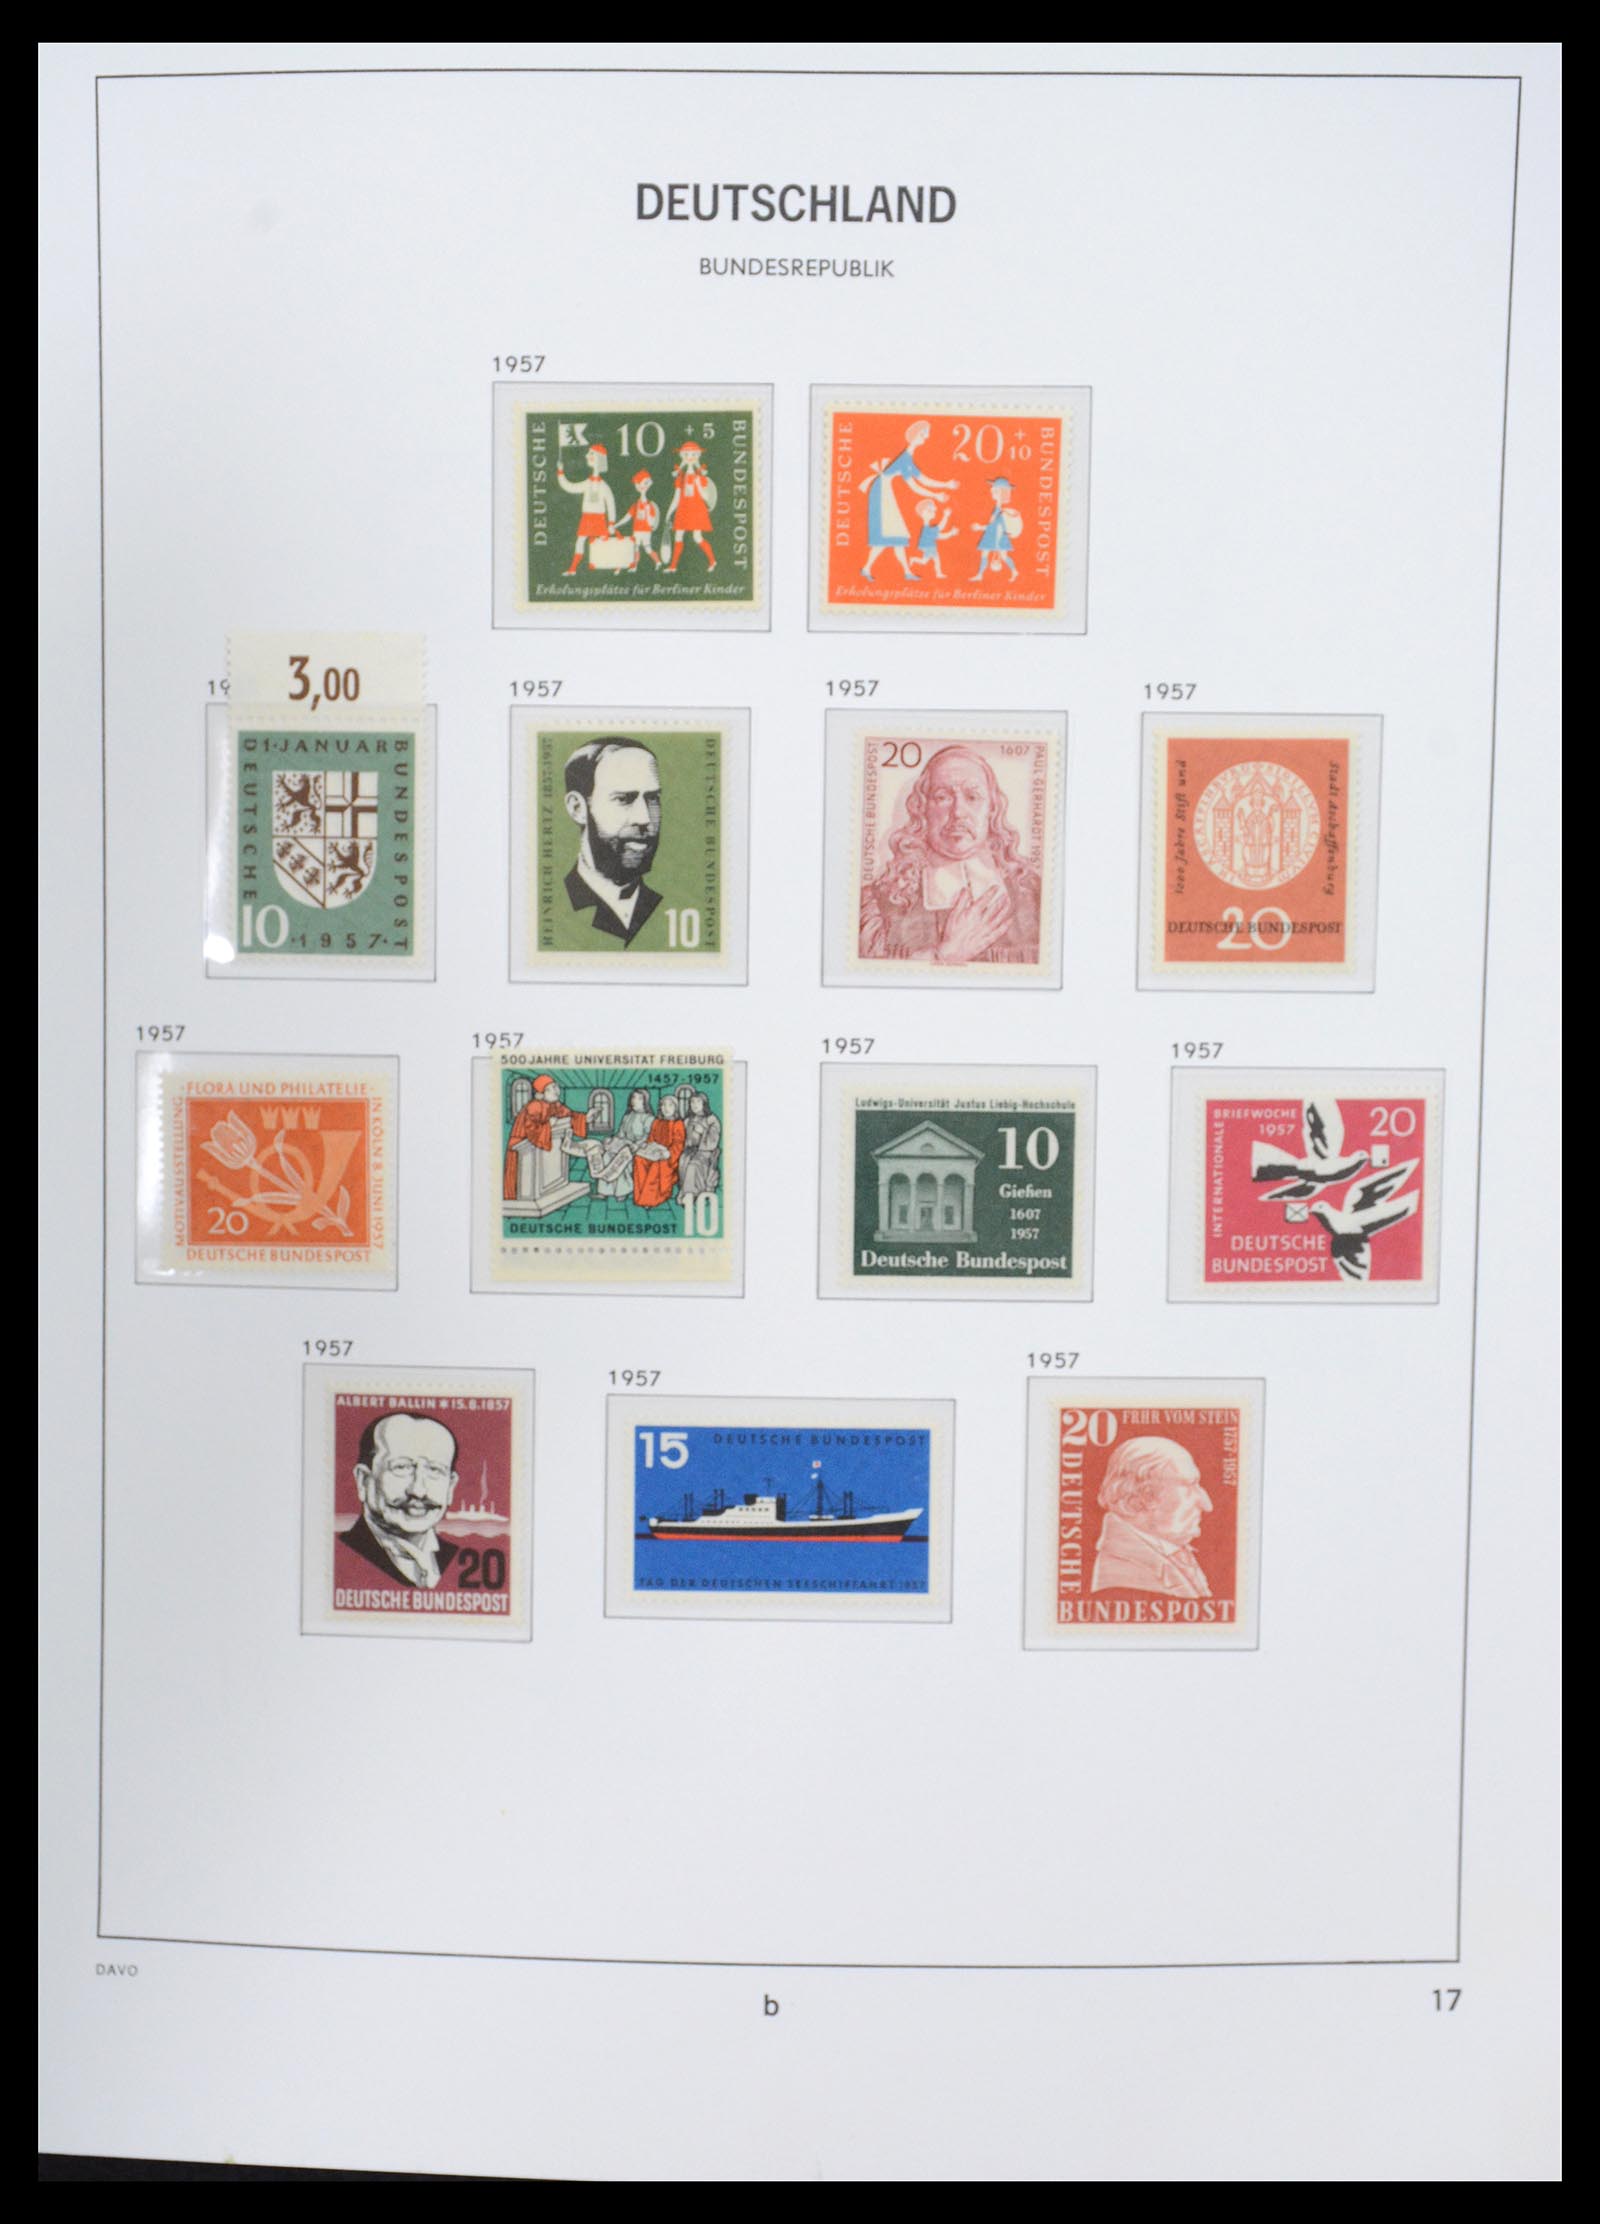 36387 011 - Stamp collection 36387 Bundespost 1949-2007.